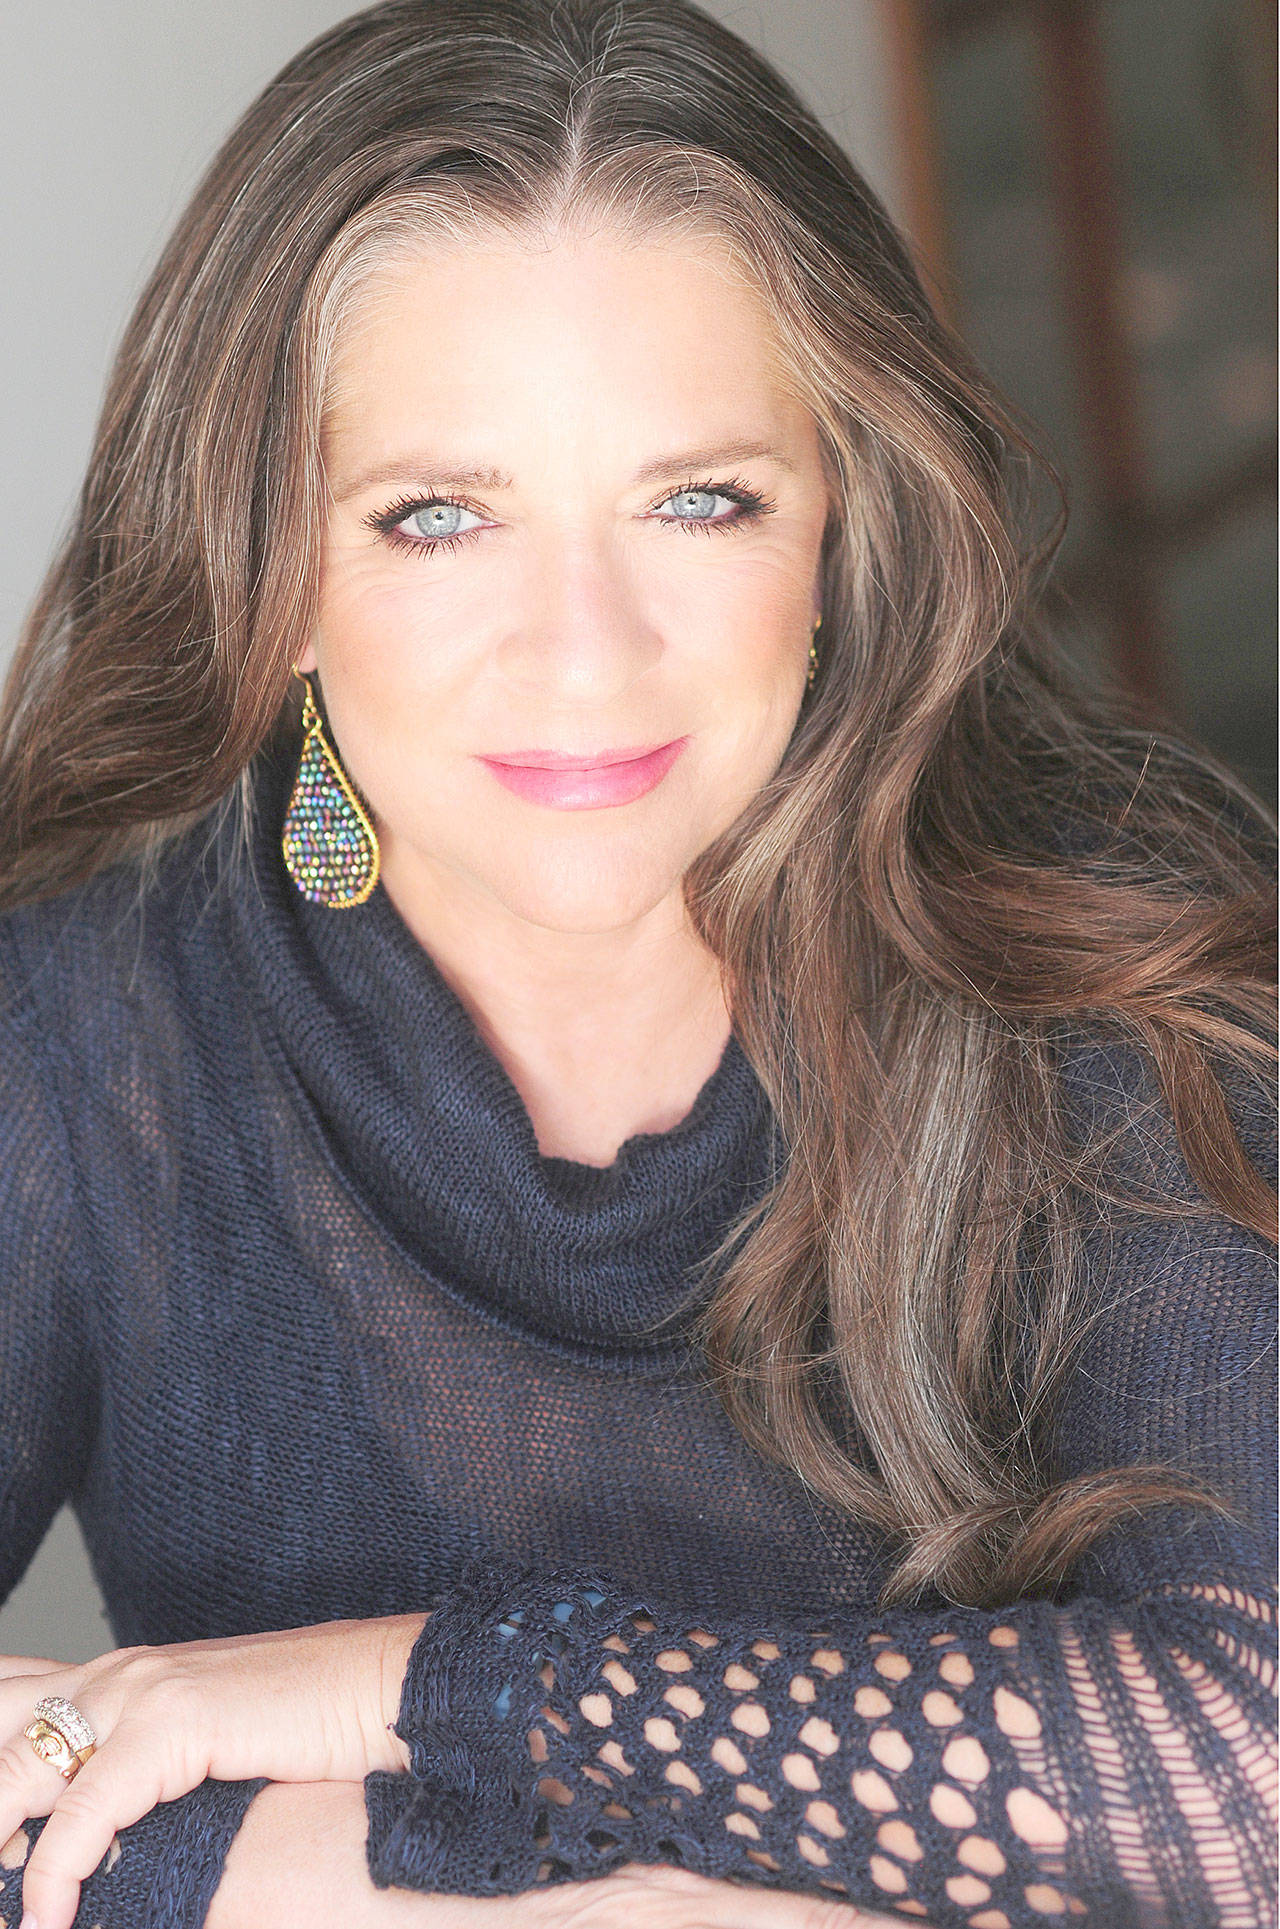 Carlene Carter to bring her music and family legacy to Bishop Center stage